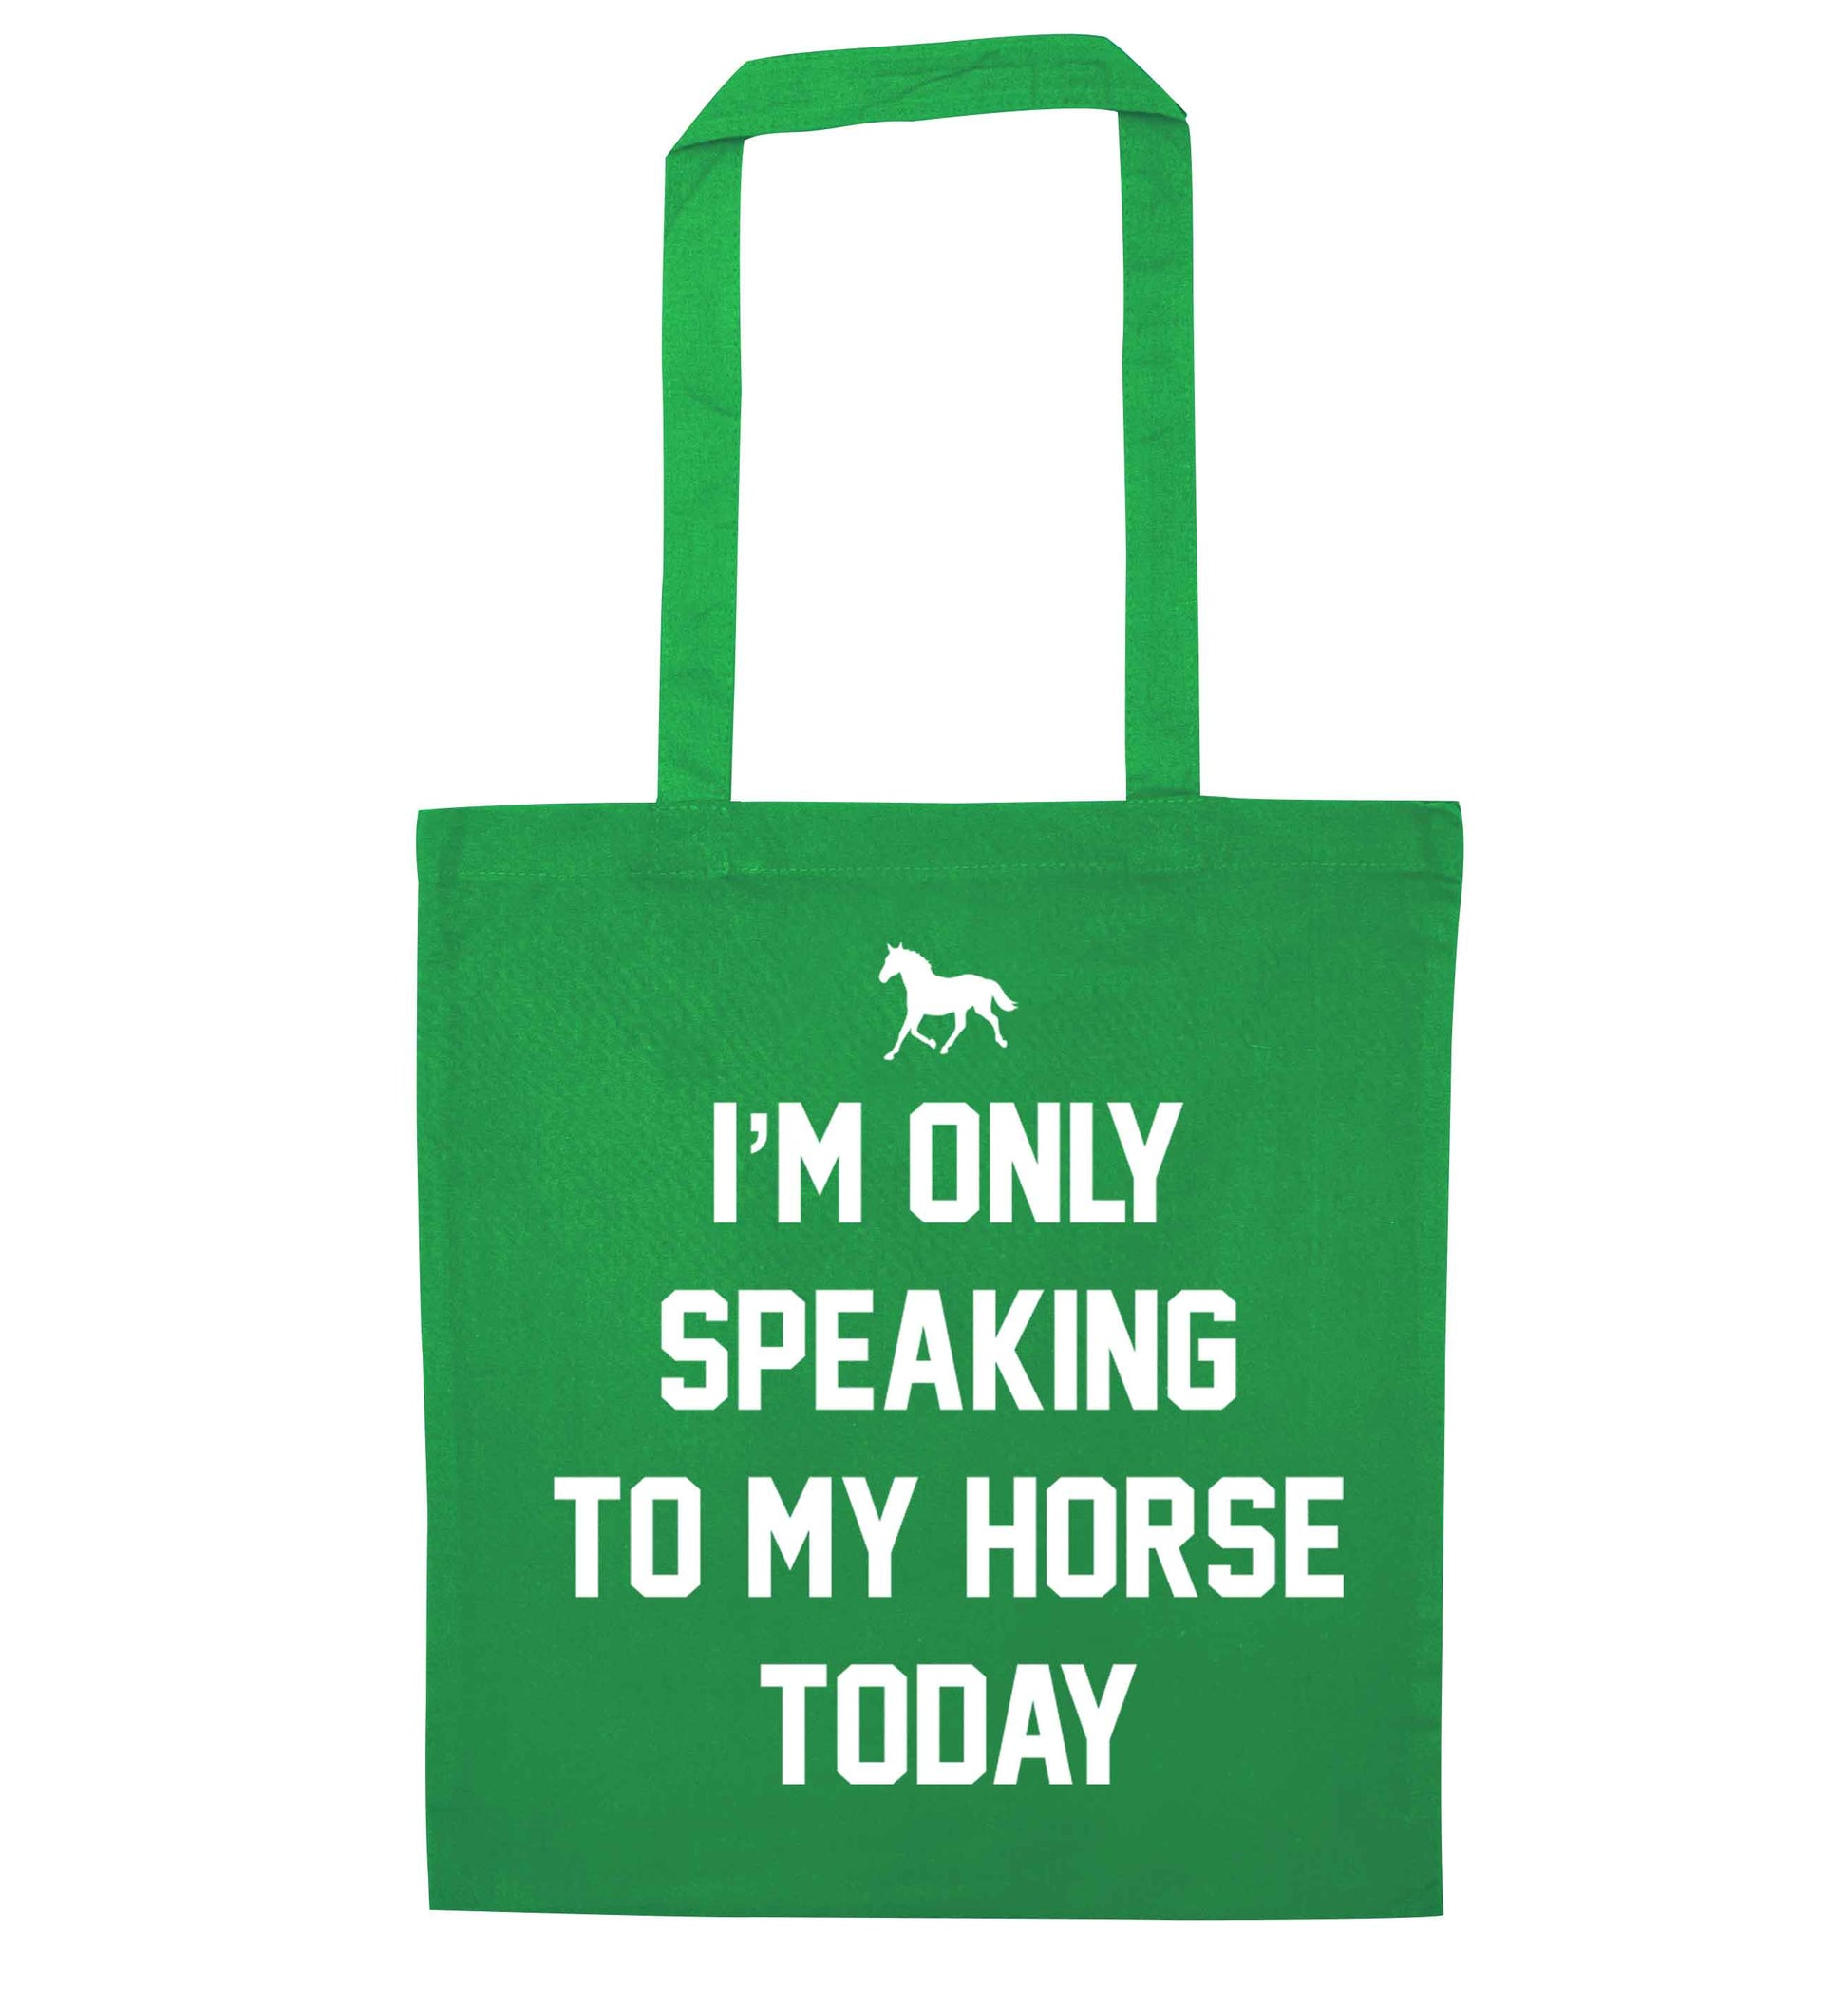 I'm only speaking to my horse today green tote bag